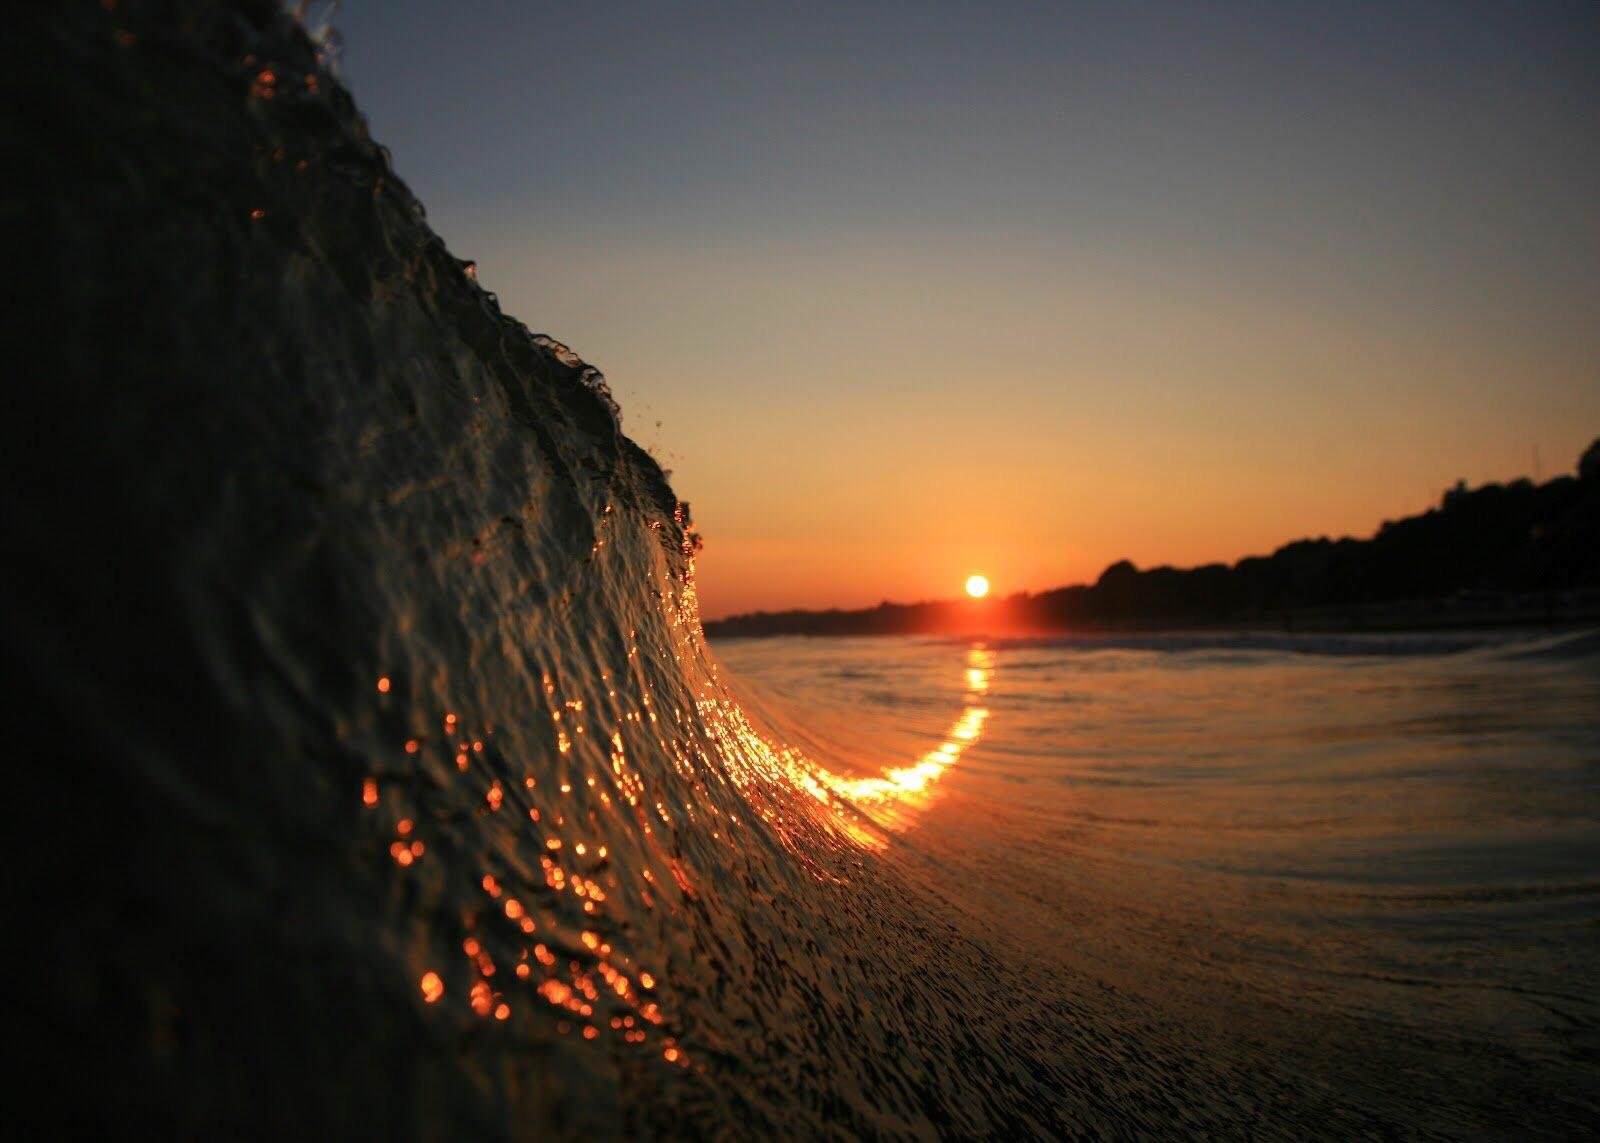 satisfying pic sunset curling up with a wave